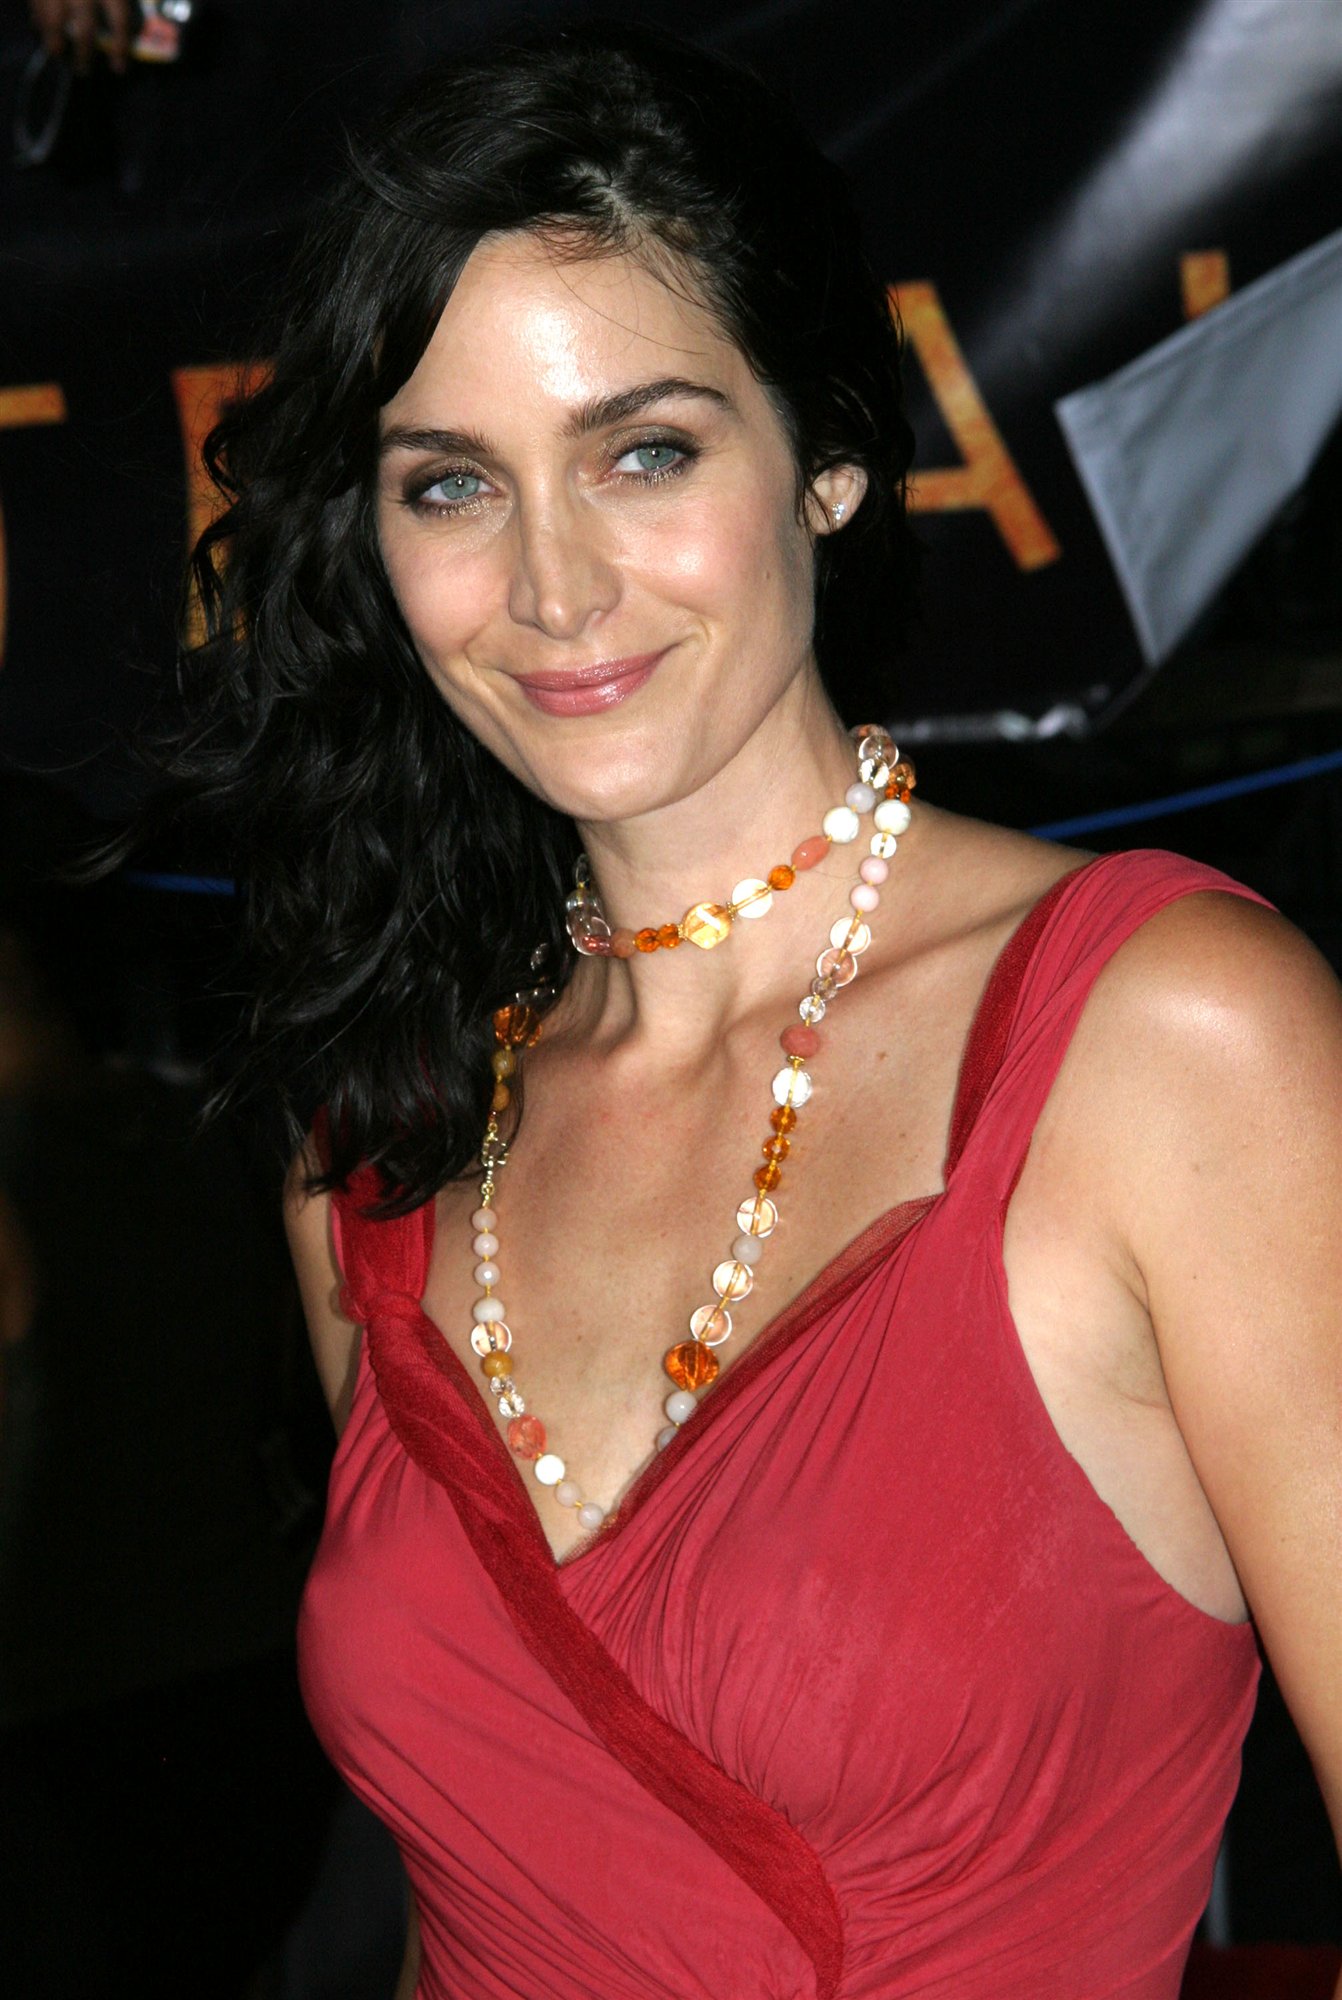 Model Carrie Anne Moss Wallpapers 6448.